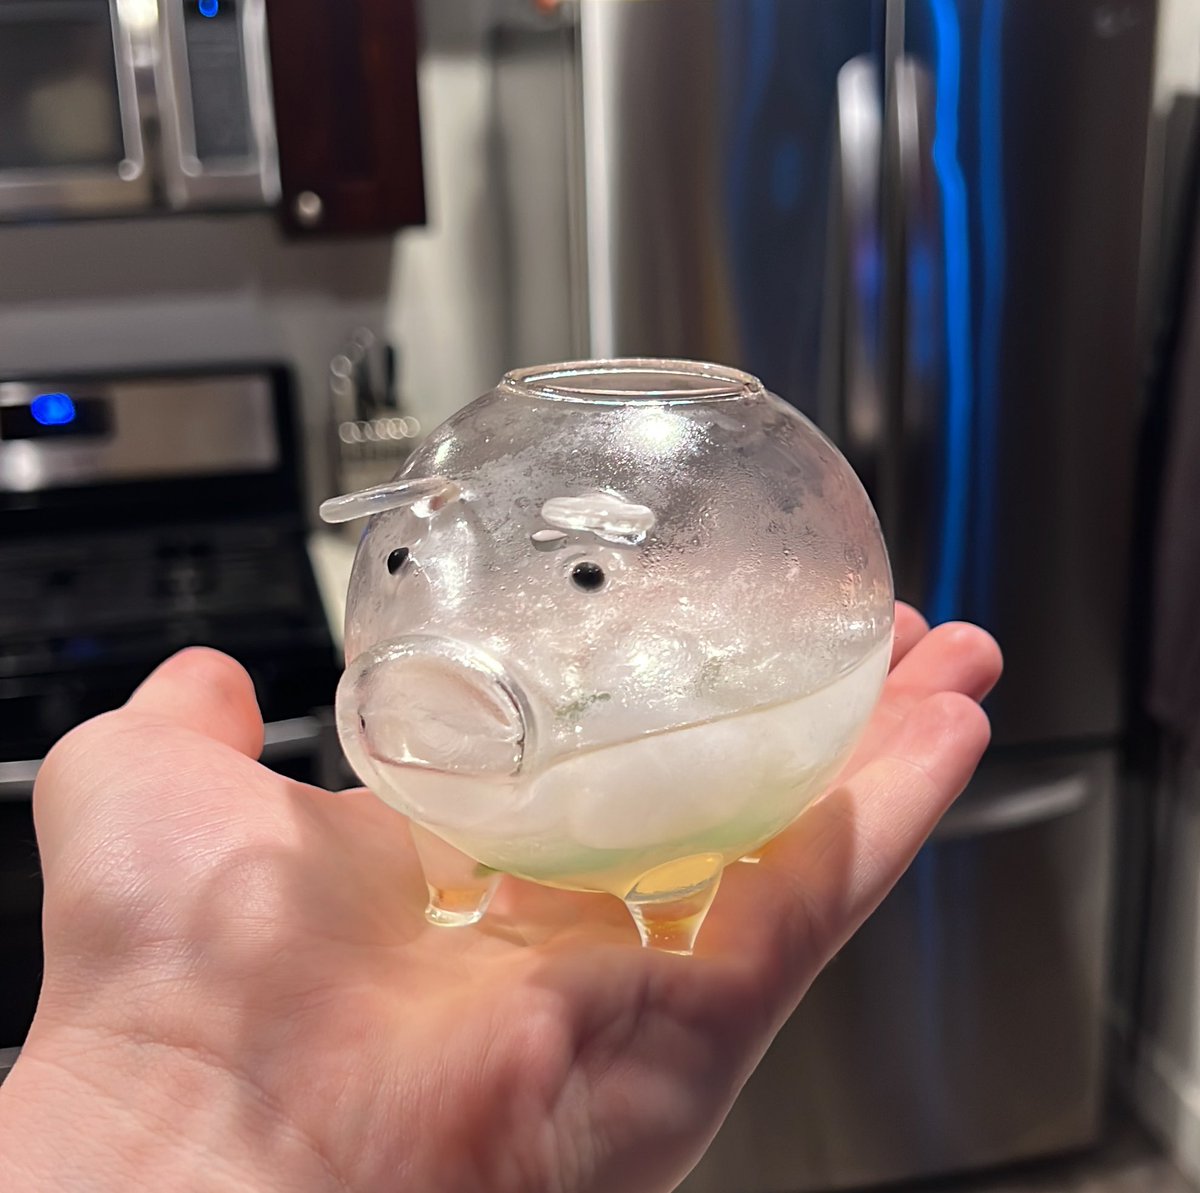 having a drink out of my pig glass tonight shits gonna get pretty crazy